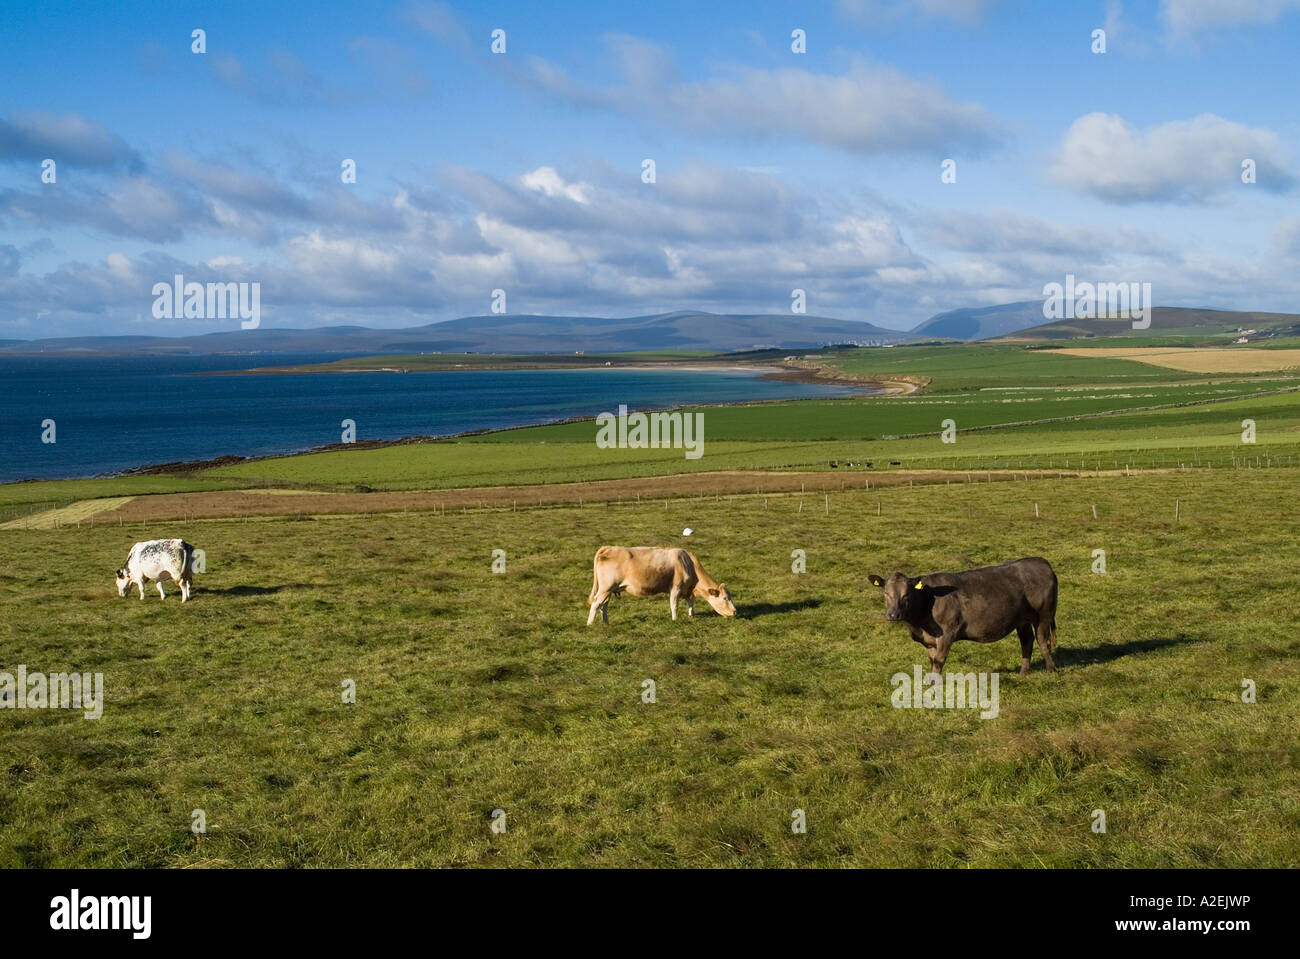 dh Cow ANIMALS FARMING Beef cattle cows grazing in field above Scapa Flow shore Orkney Stock Photo